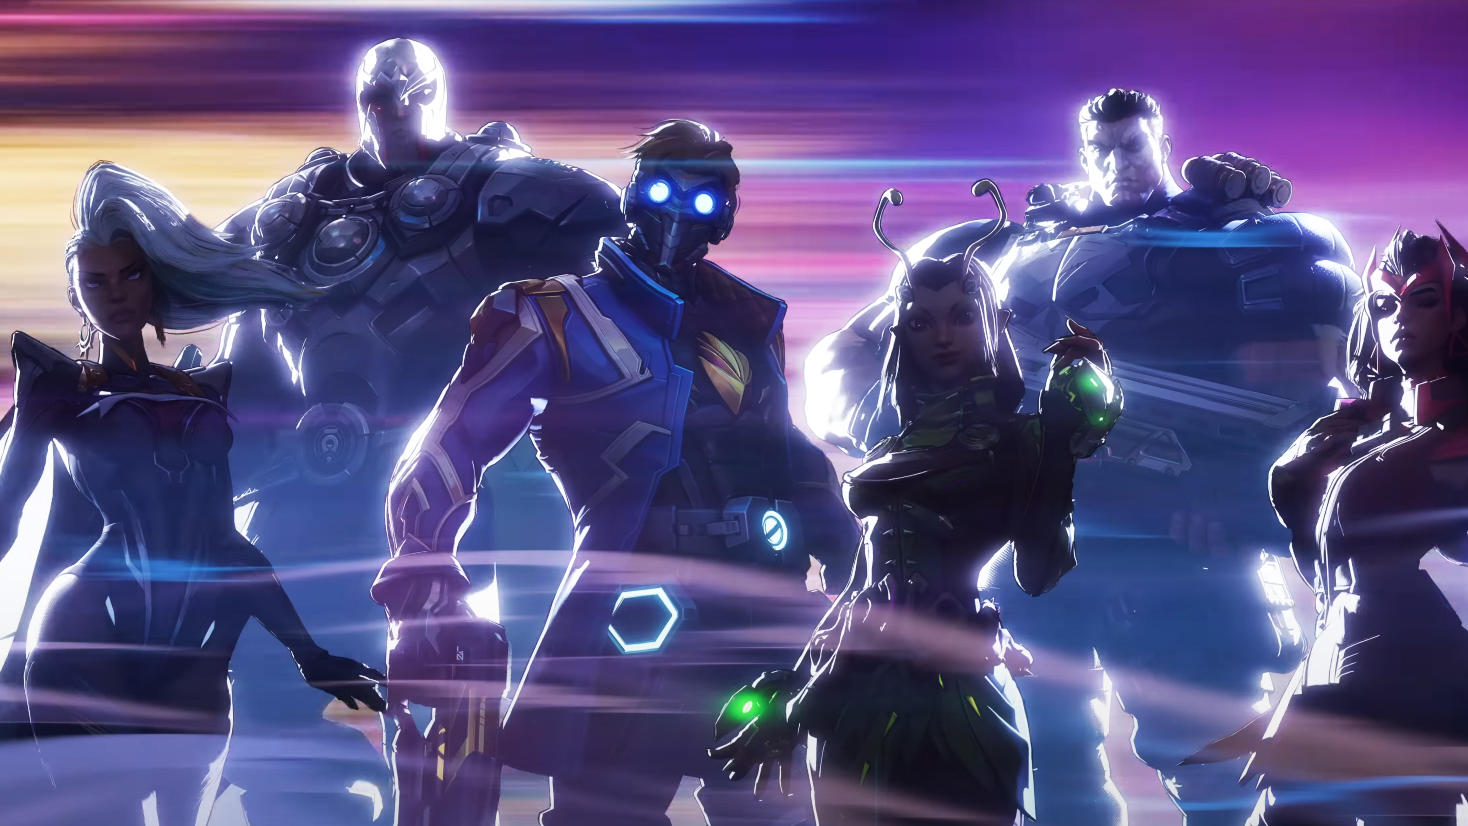 Marvel Rivals Trailer Reveals First Look at Overwatch-Style PvP Game